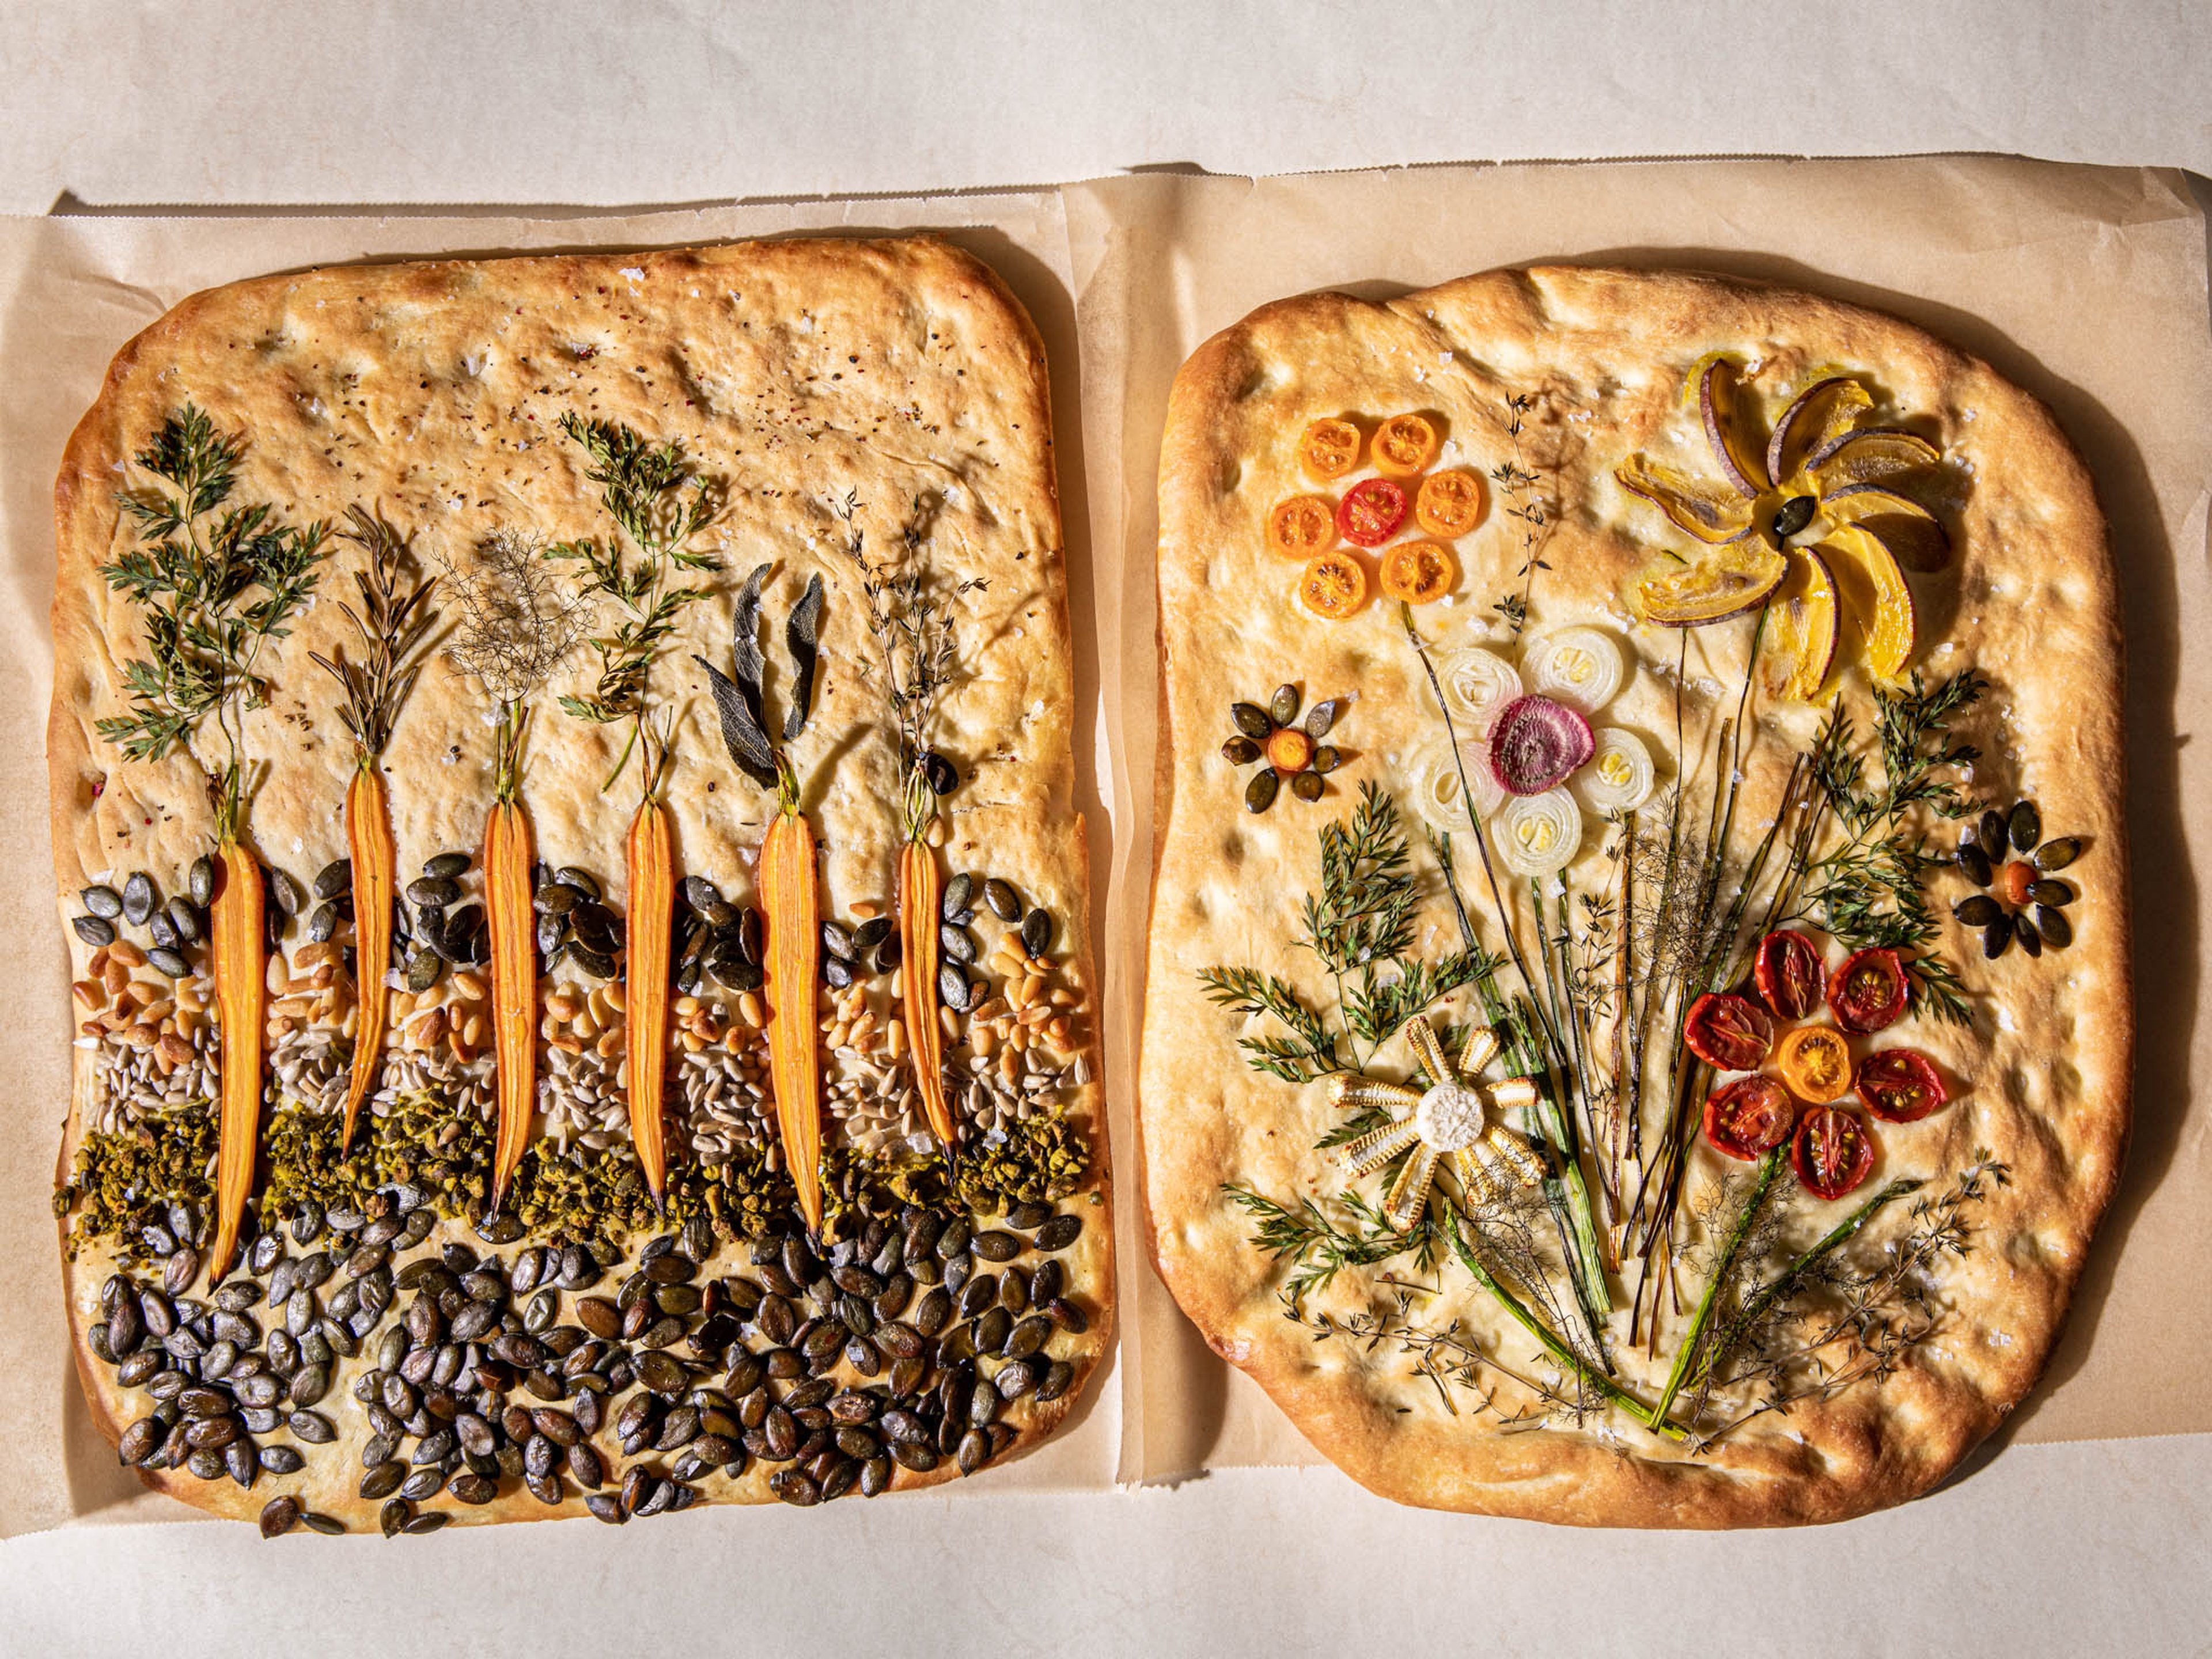 What’s the Deal With Garden Focaccia?